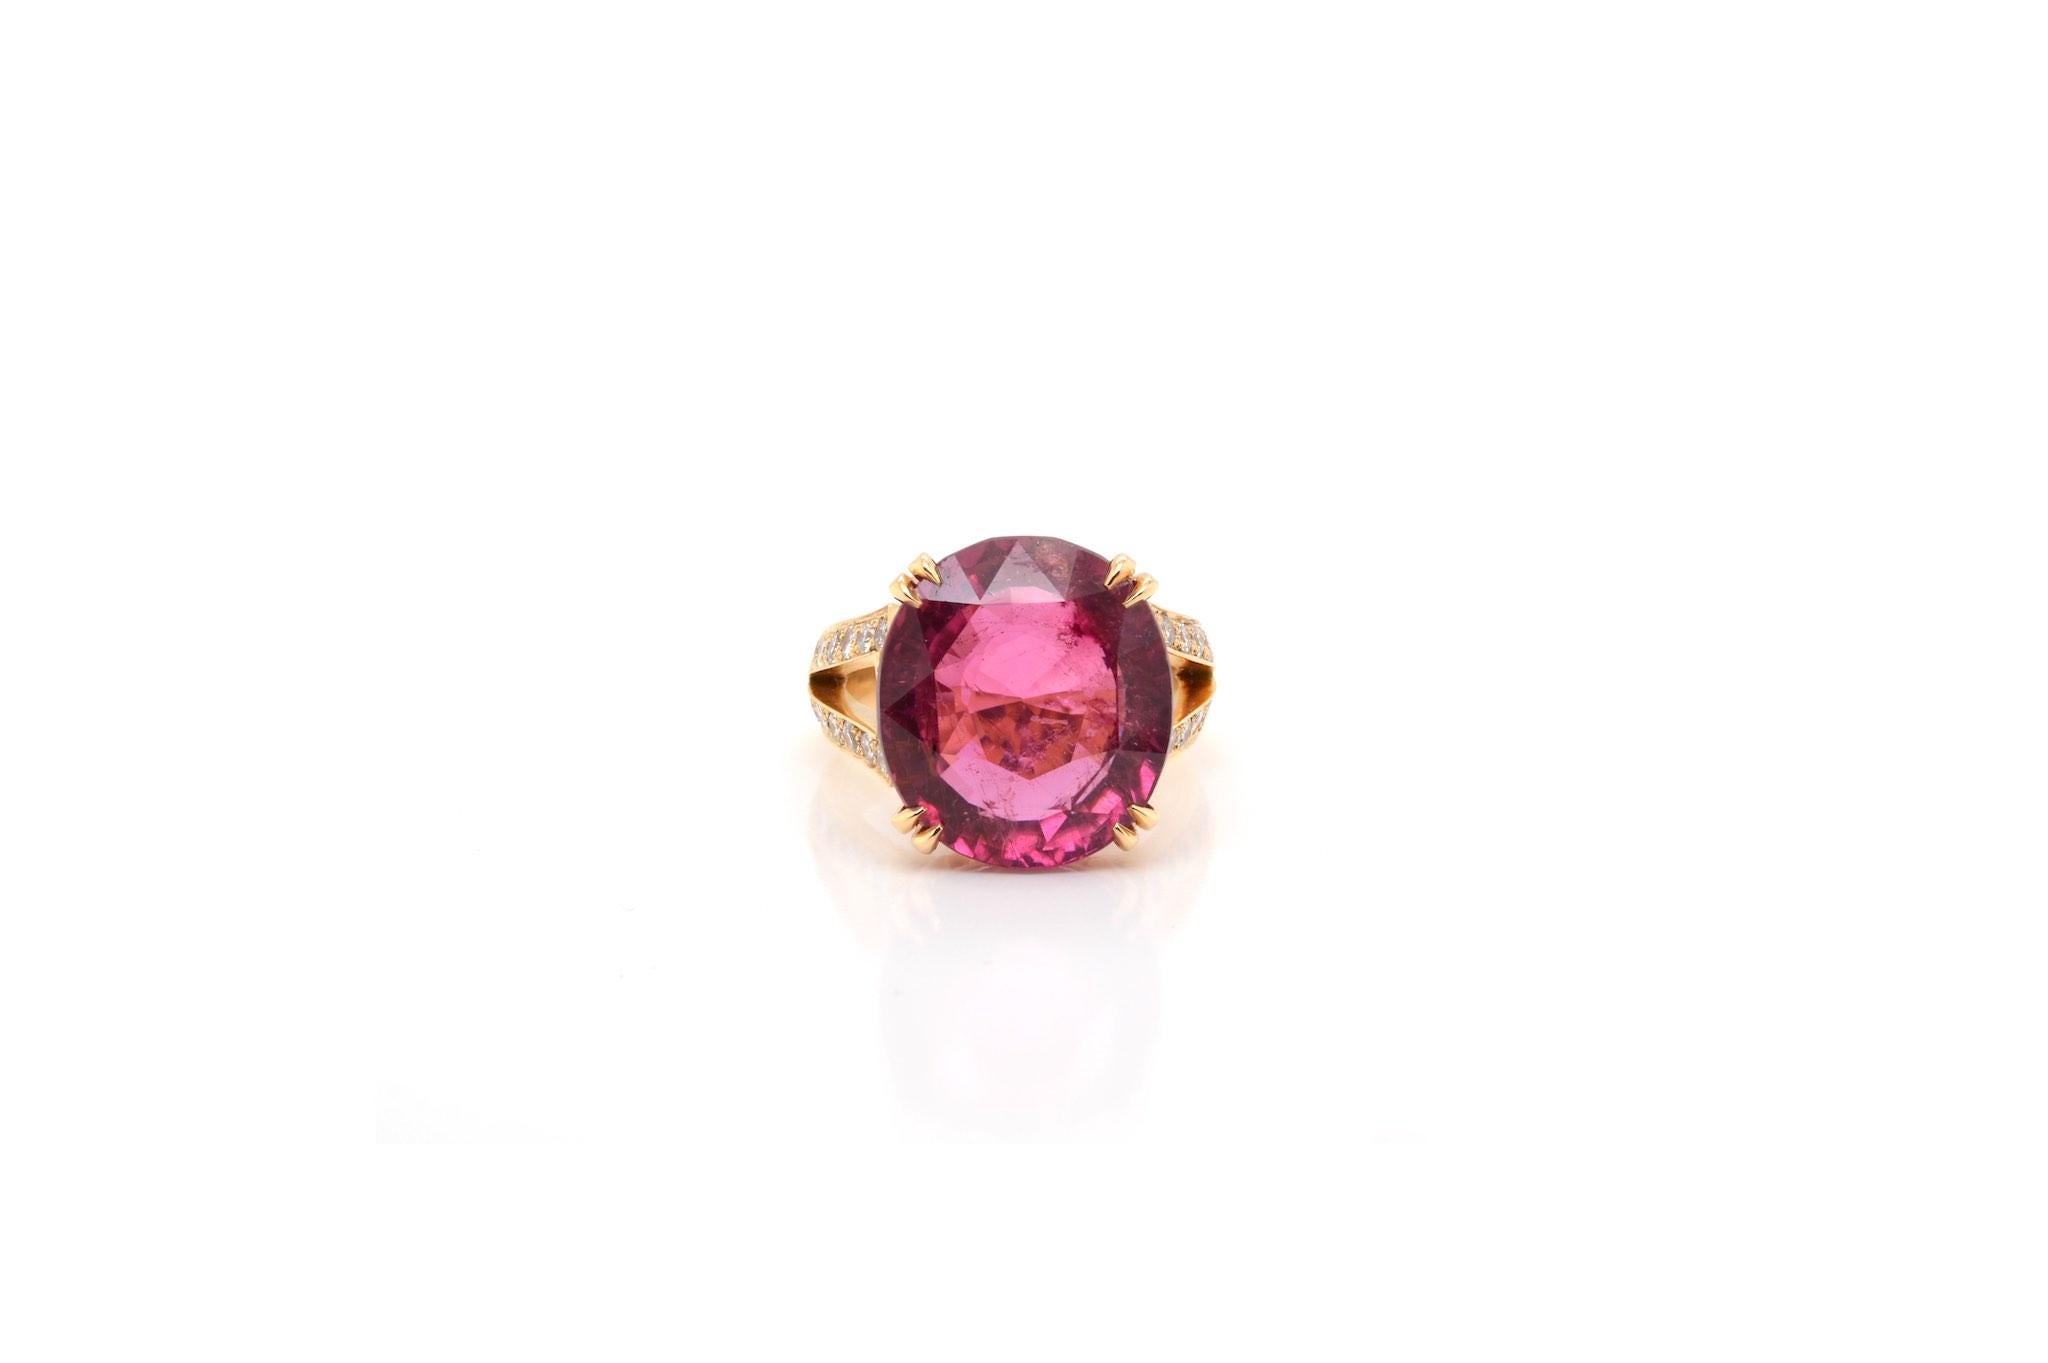 Stones: Rubellite tourmaline of 14.10 carats
and brilliant cut diamonds for a total weight of 0.28 carat.
Material: 18k yellow gold
Dimensions: 16 mm in length on finger, 9 mm in height.
Weight: 10.3g
Size: 52 (free sizing)
Certificate
Ref. : 24562